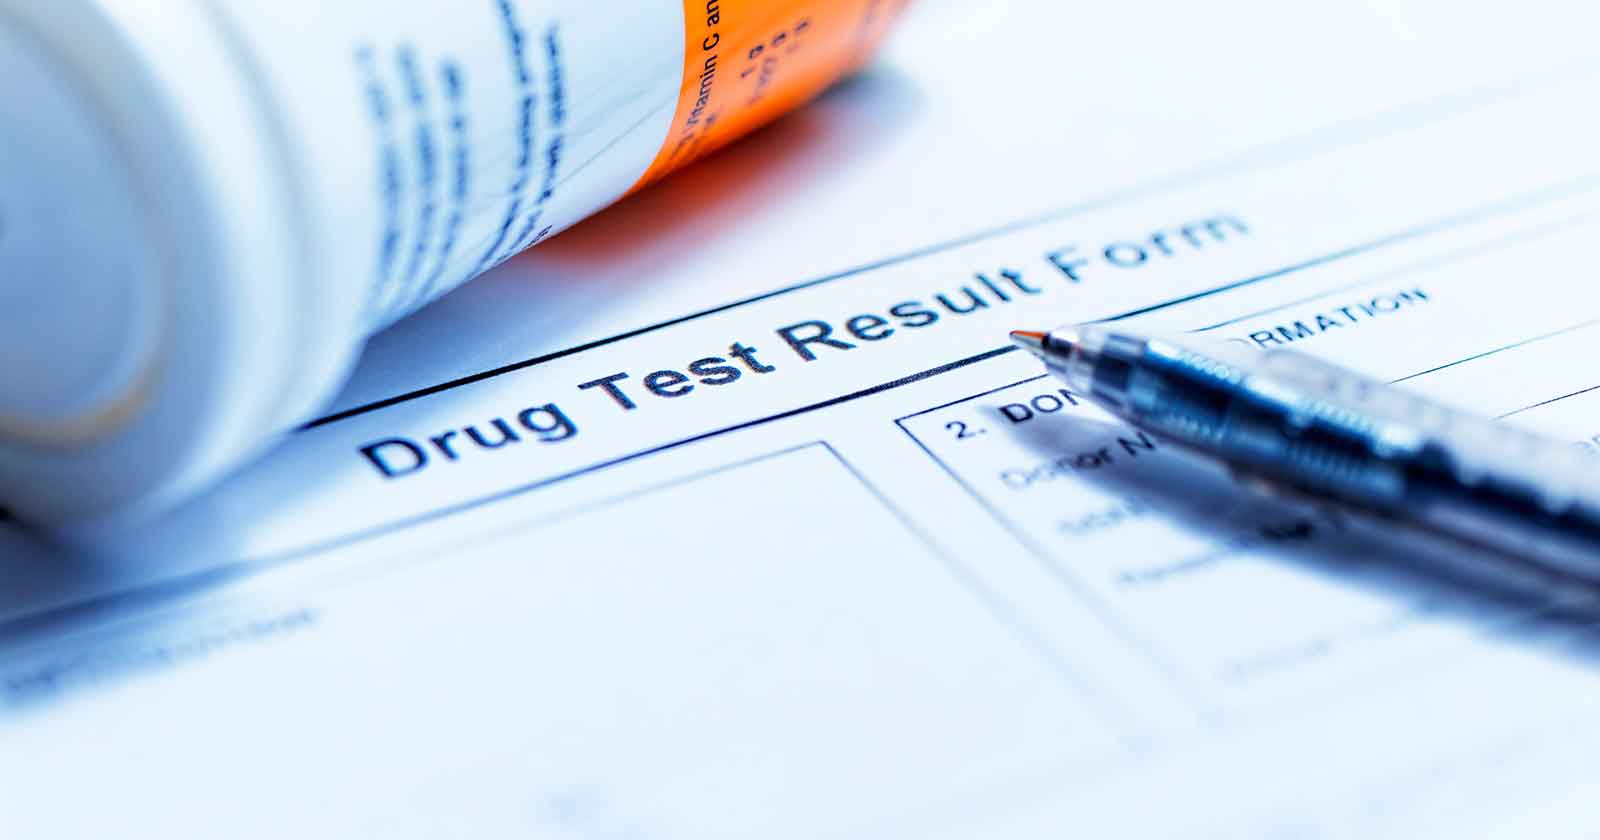 What drugs do drug tests test for?